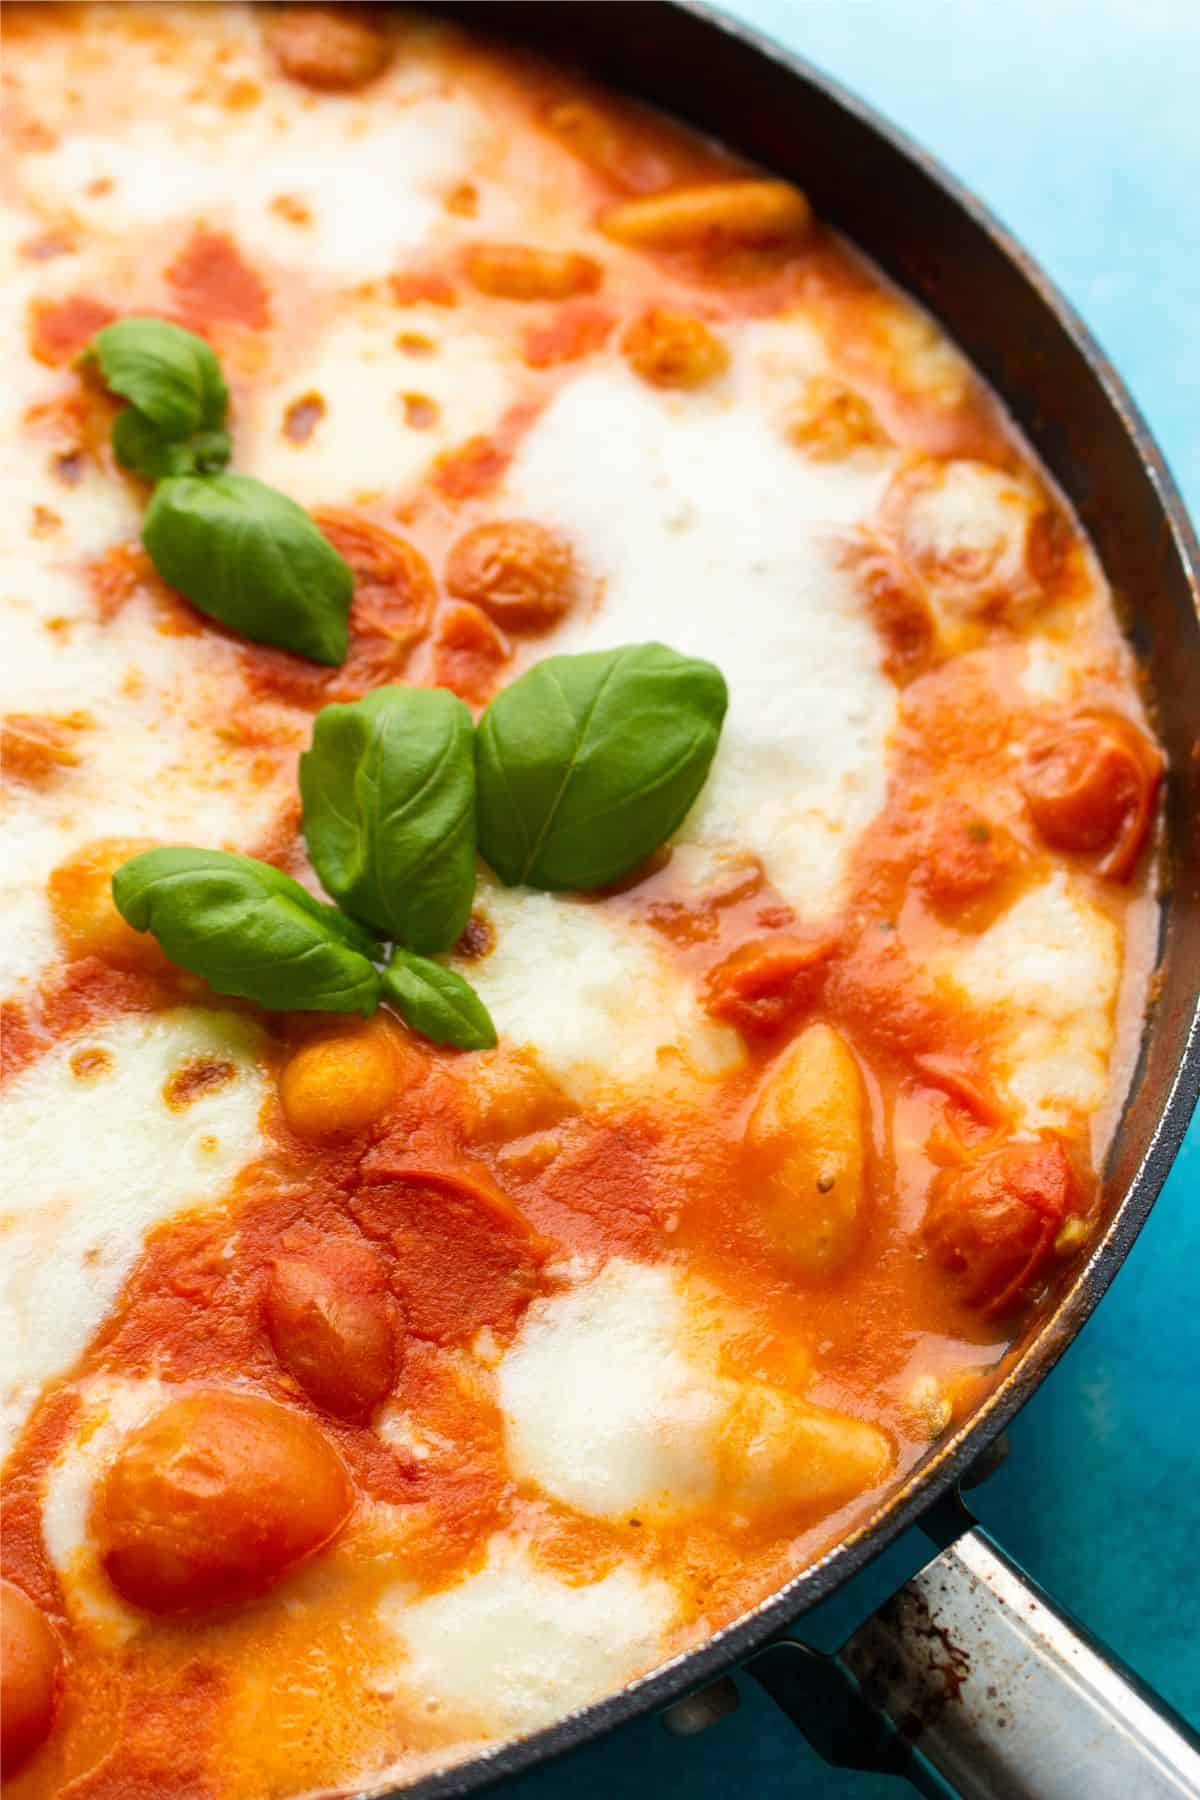 CLose up of Gnocchi in a pan with tomato sauce and melted mozzarella and fresh basil.